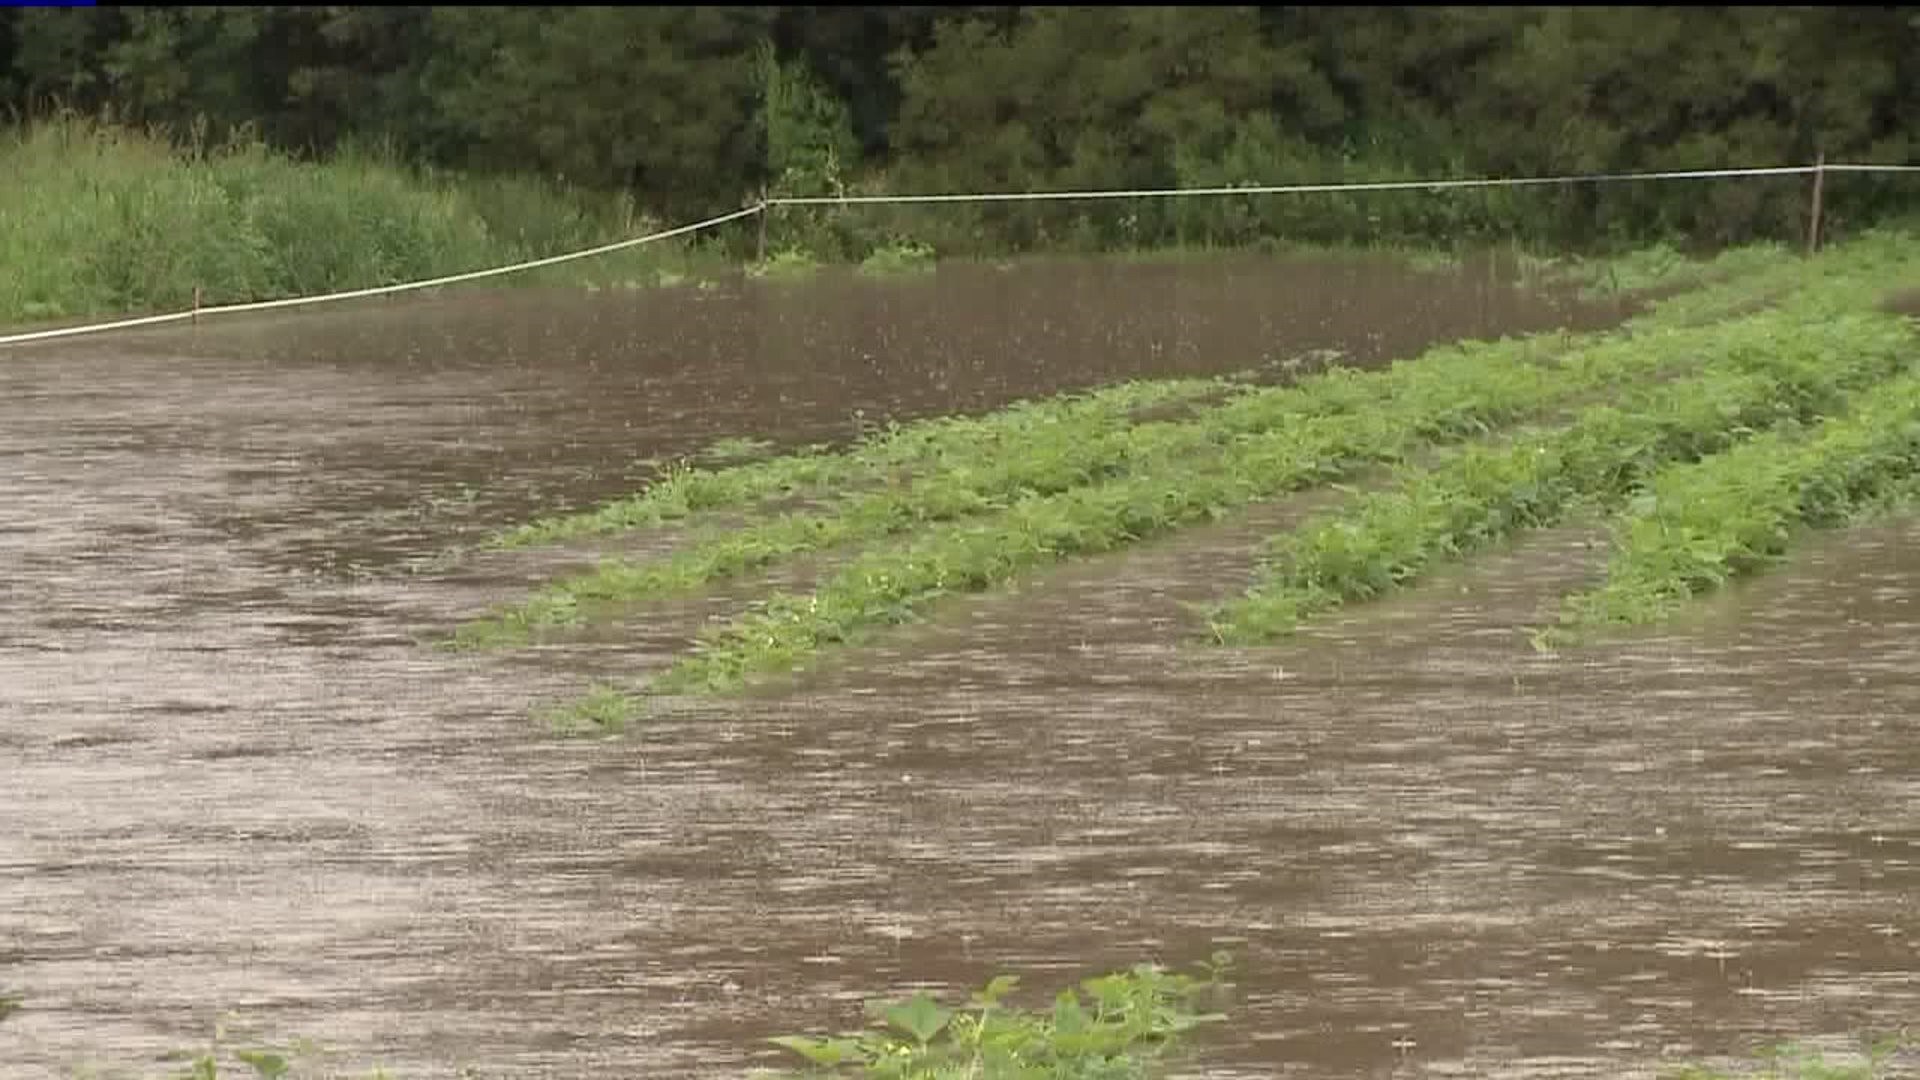 Governor Announces Disaster Relief for Farmers Affected by Flooding